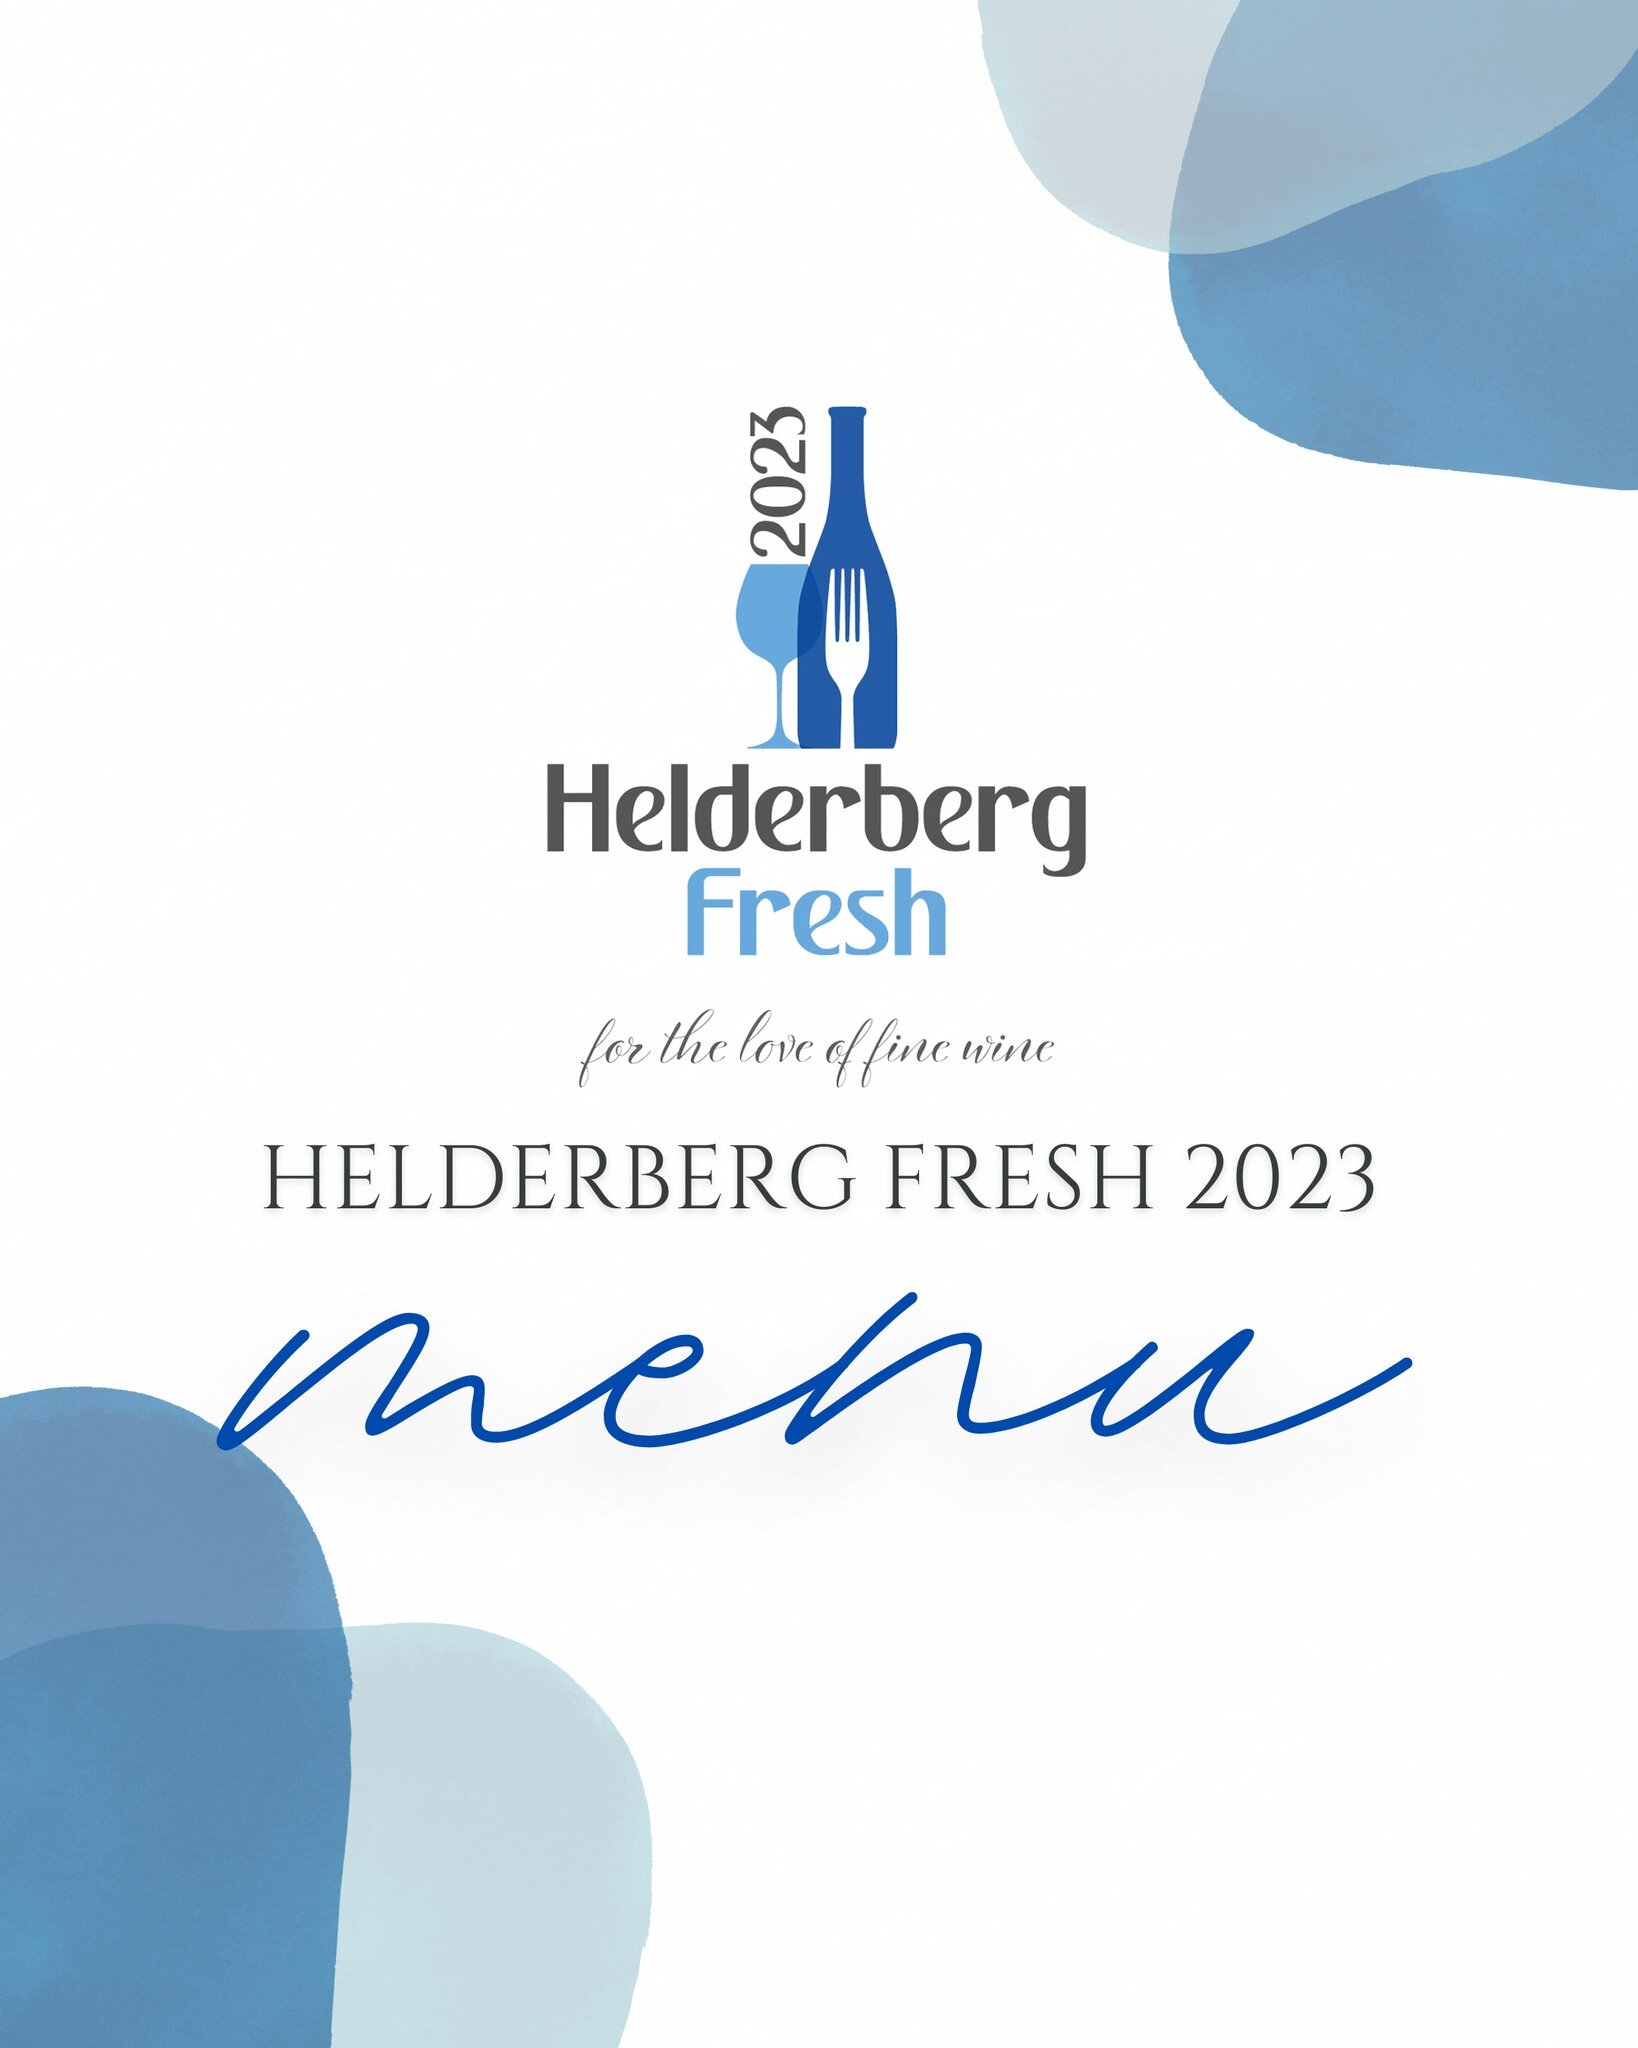 ALL-INCLUSIVE GOURMET &amp; WINE EXTRAVAGANZA AT HELDERBERG FRESH!

 Join us at the Helderberg Wine Festival for an all-inclusive experience! Your ticket unlocks a world of over 150 wines, gourmet small plates from top chefs, and live music. Relish d